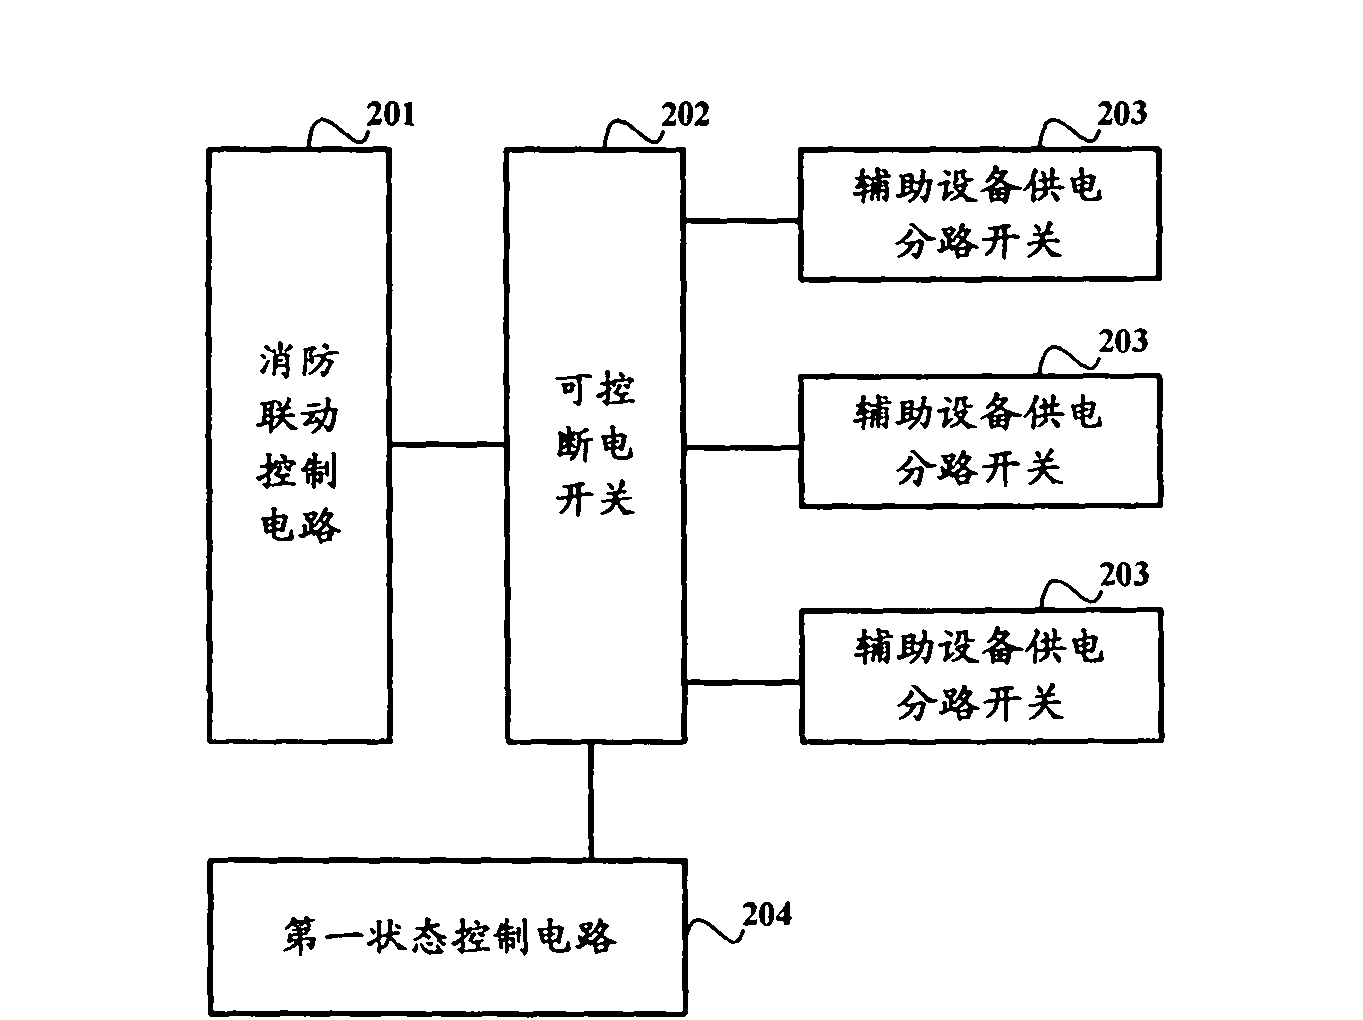 Fire-fighting linkage system and equipment applied to communication machine room